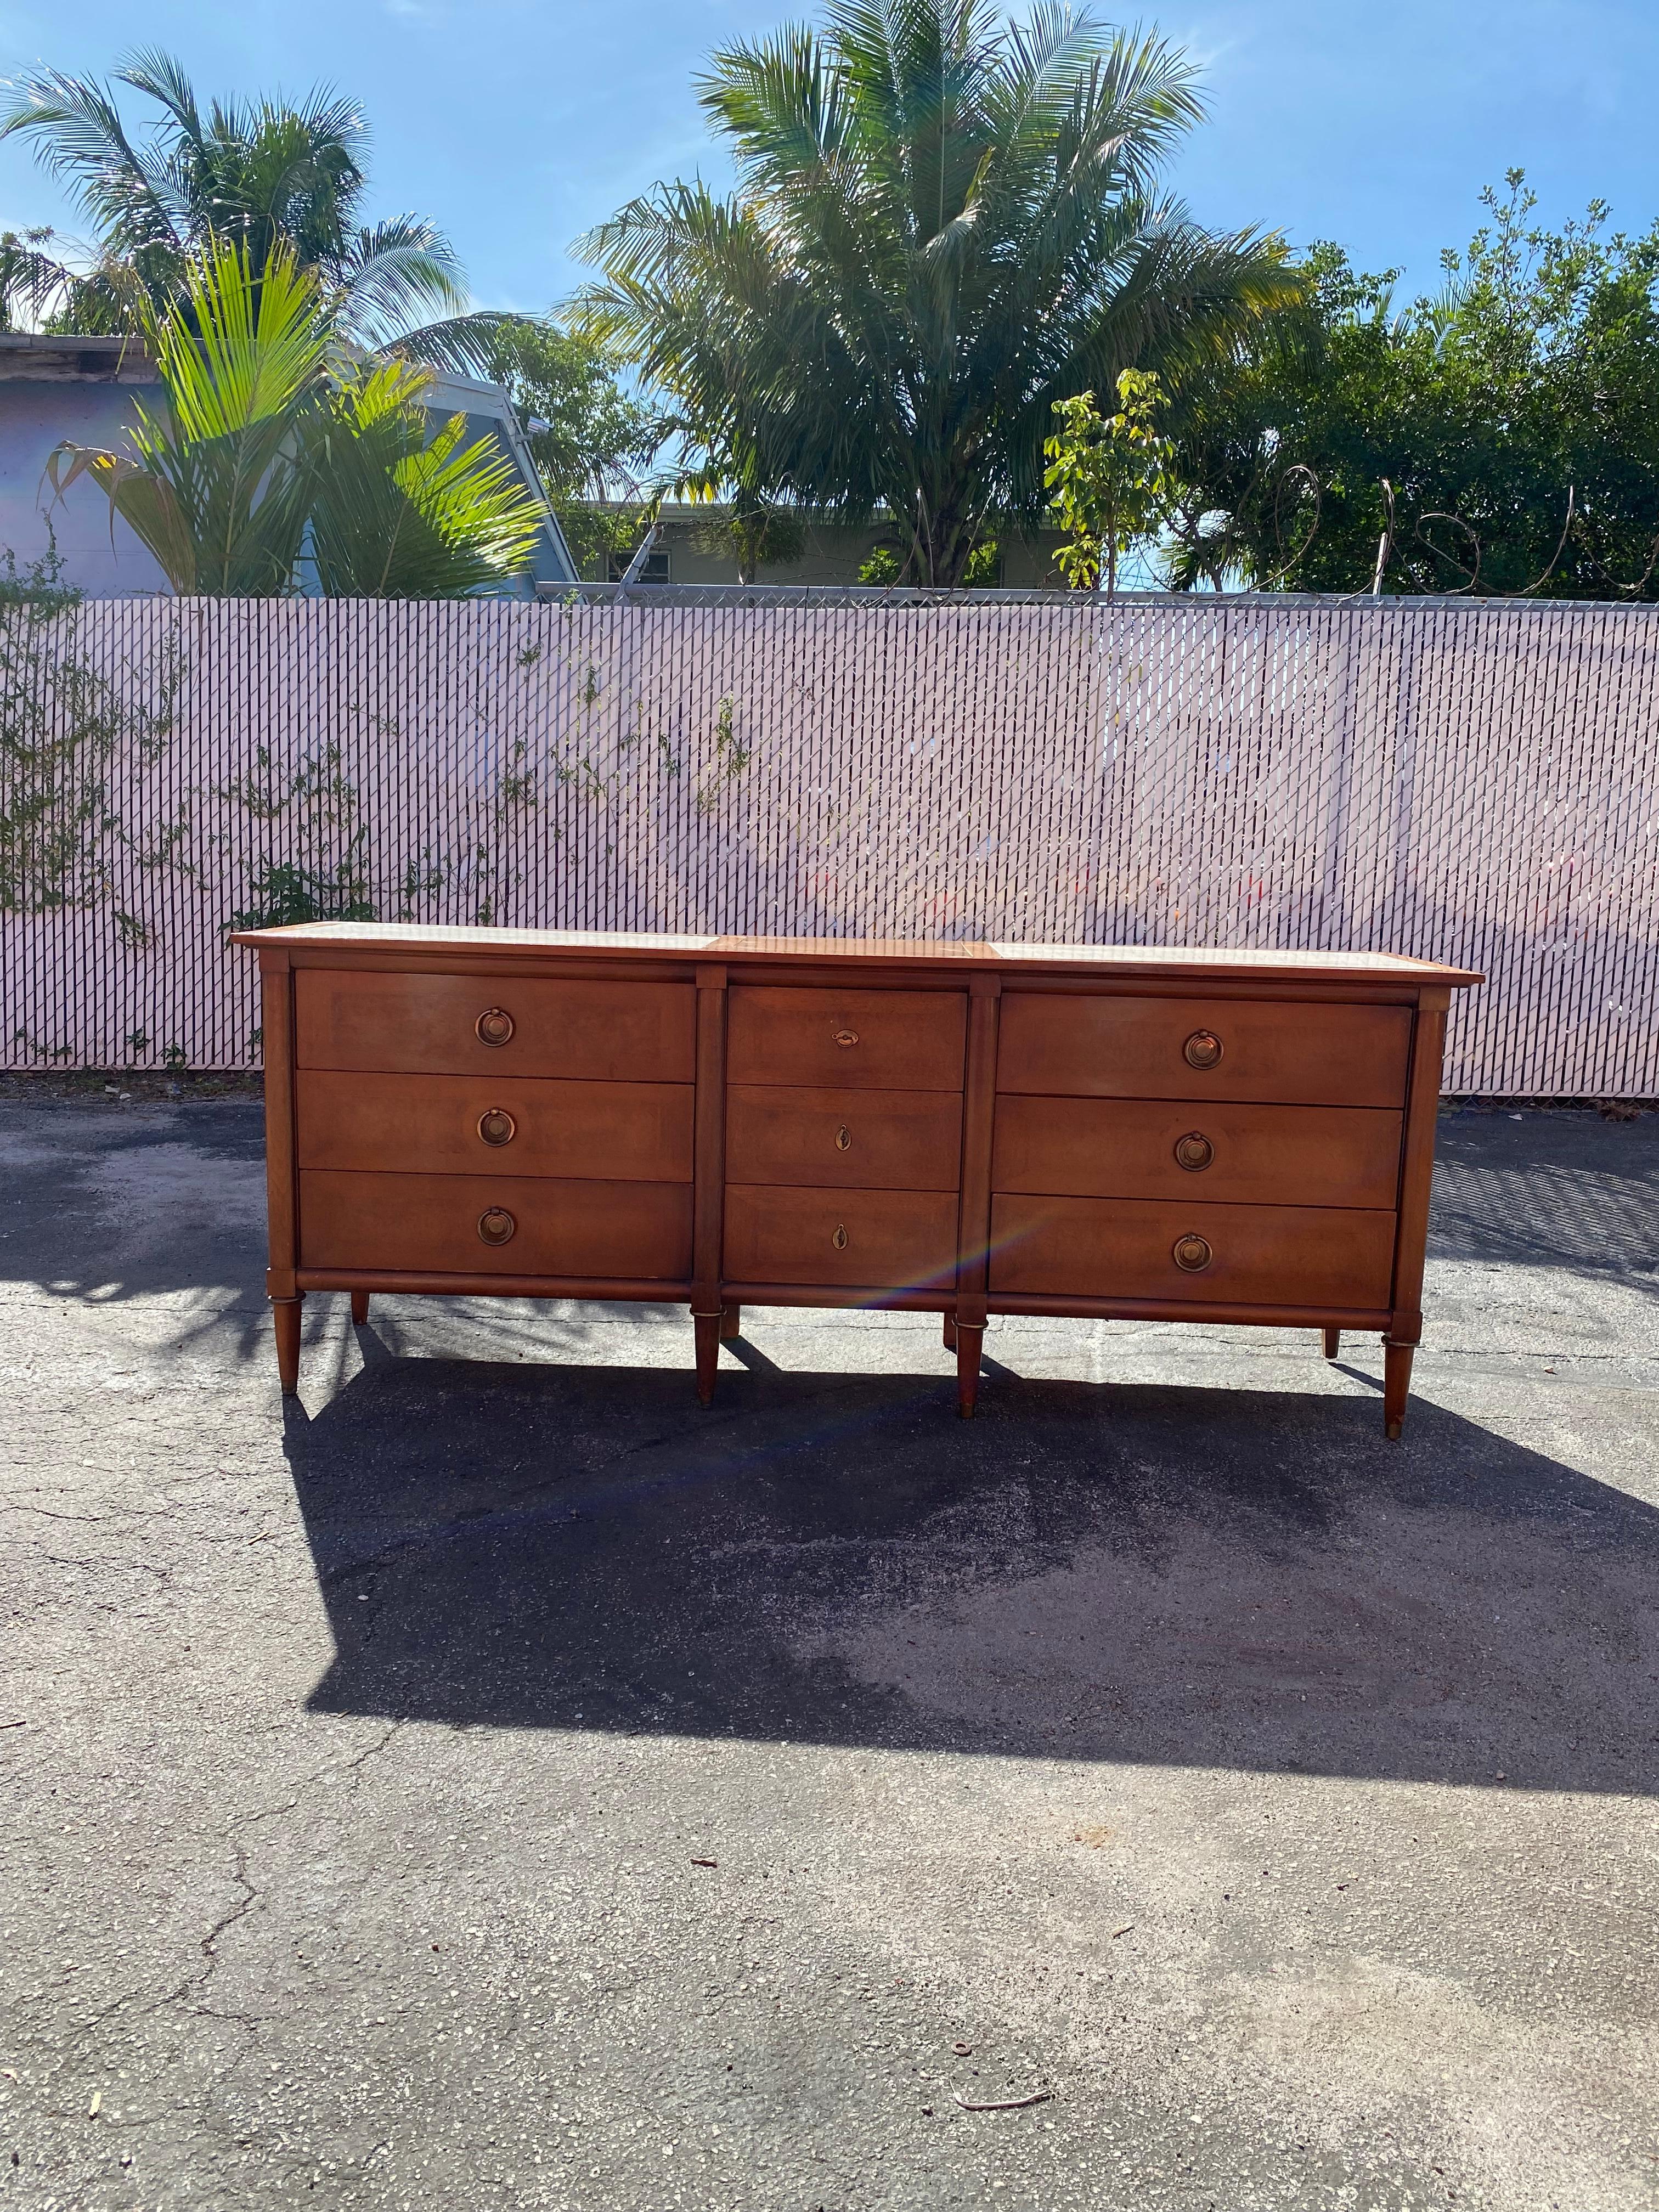 On offer on this occasion is one of the most stunning, rare travertine sideboard you could hope to find. Outstanding design is exhibited throughout. The beautiful sideboard is statement piece which and packed with personality!! Just look at the